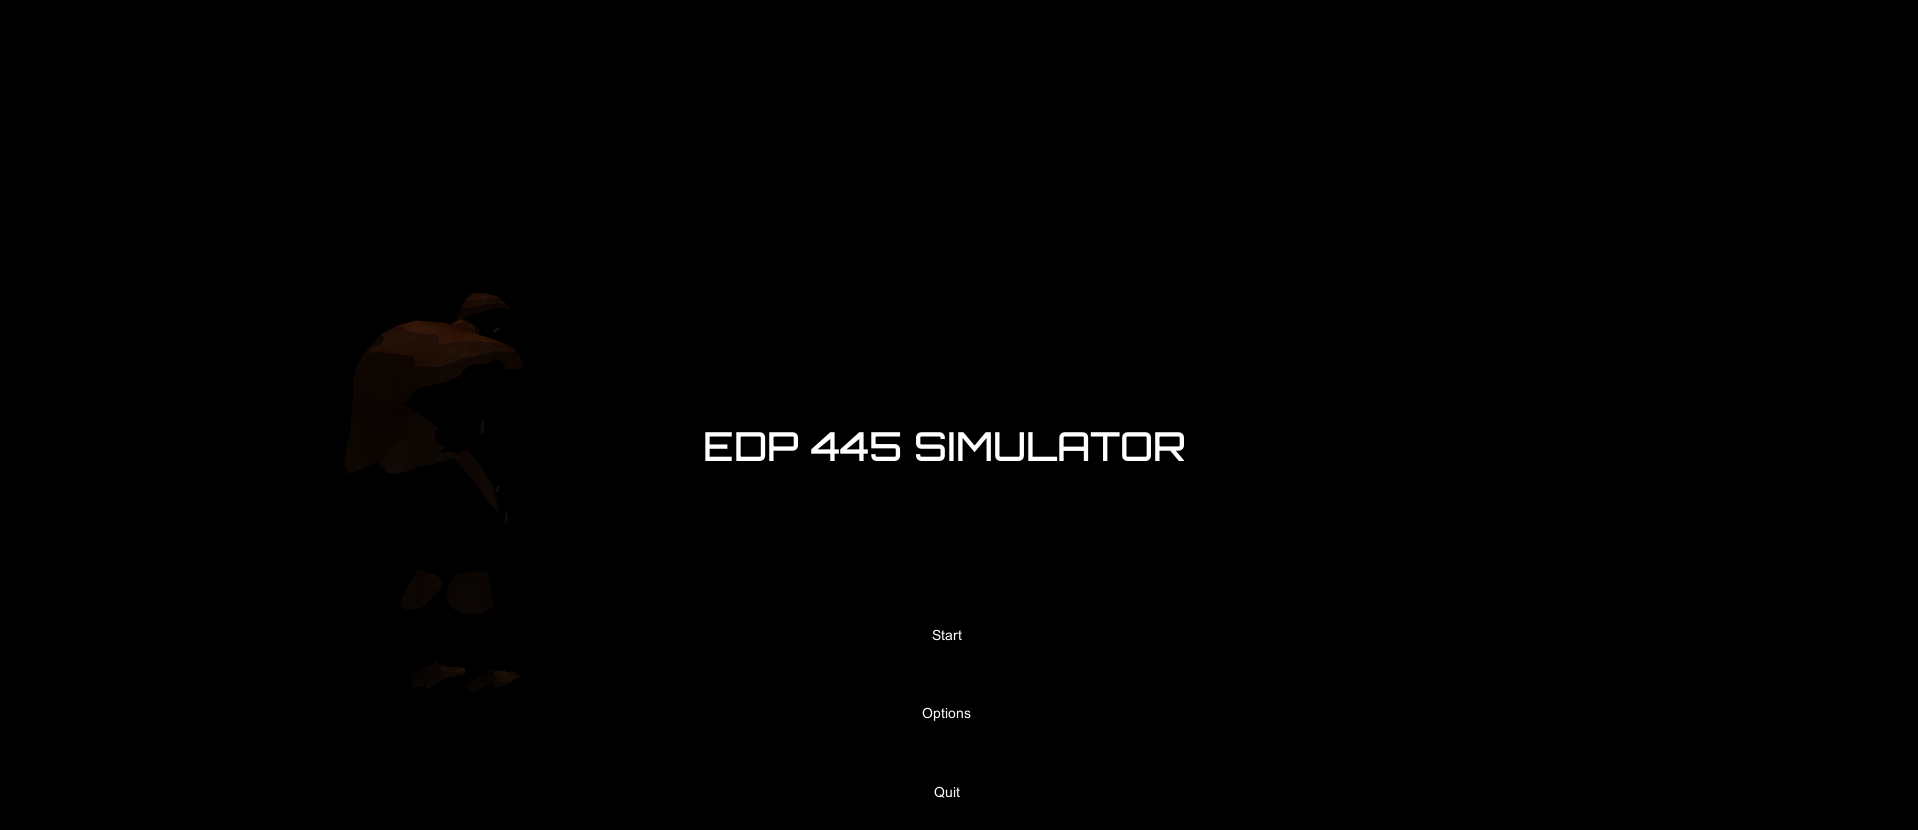 EDP 445 SIMULATOR by Monsta Manly